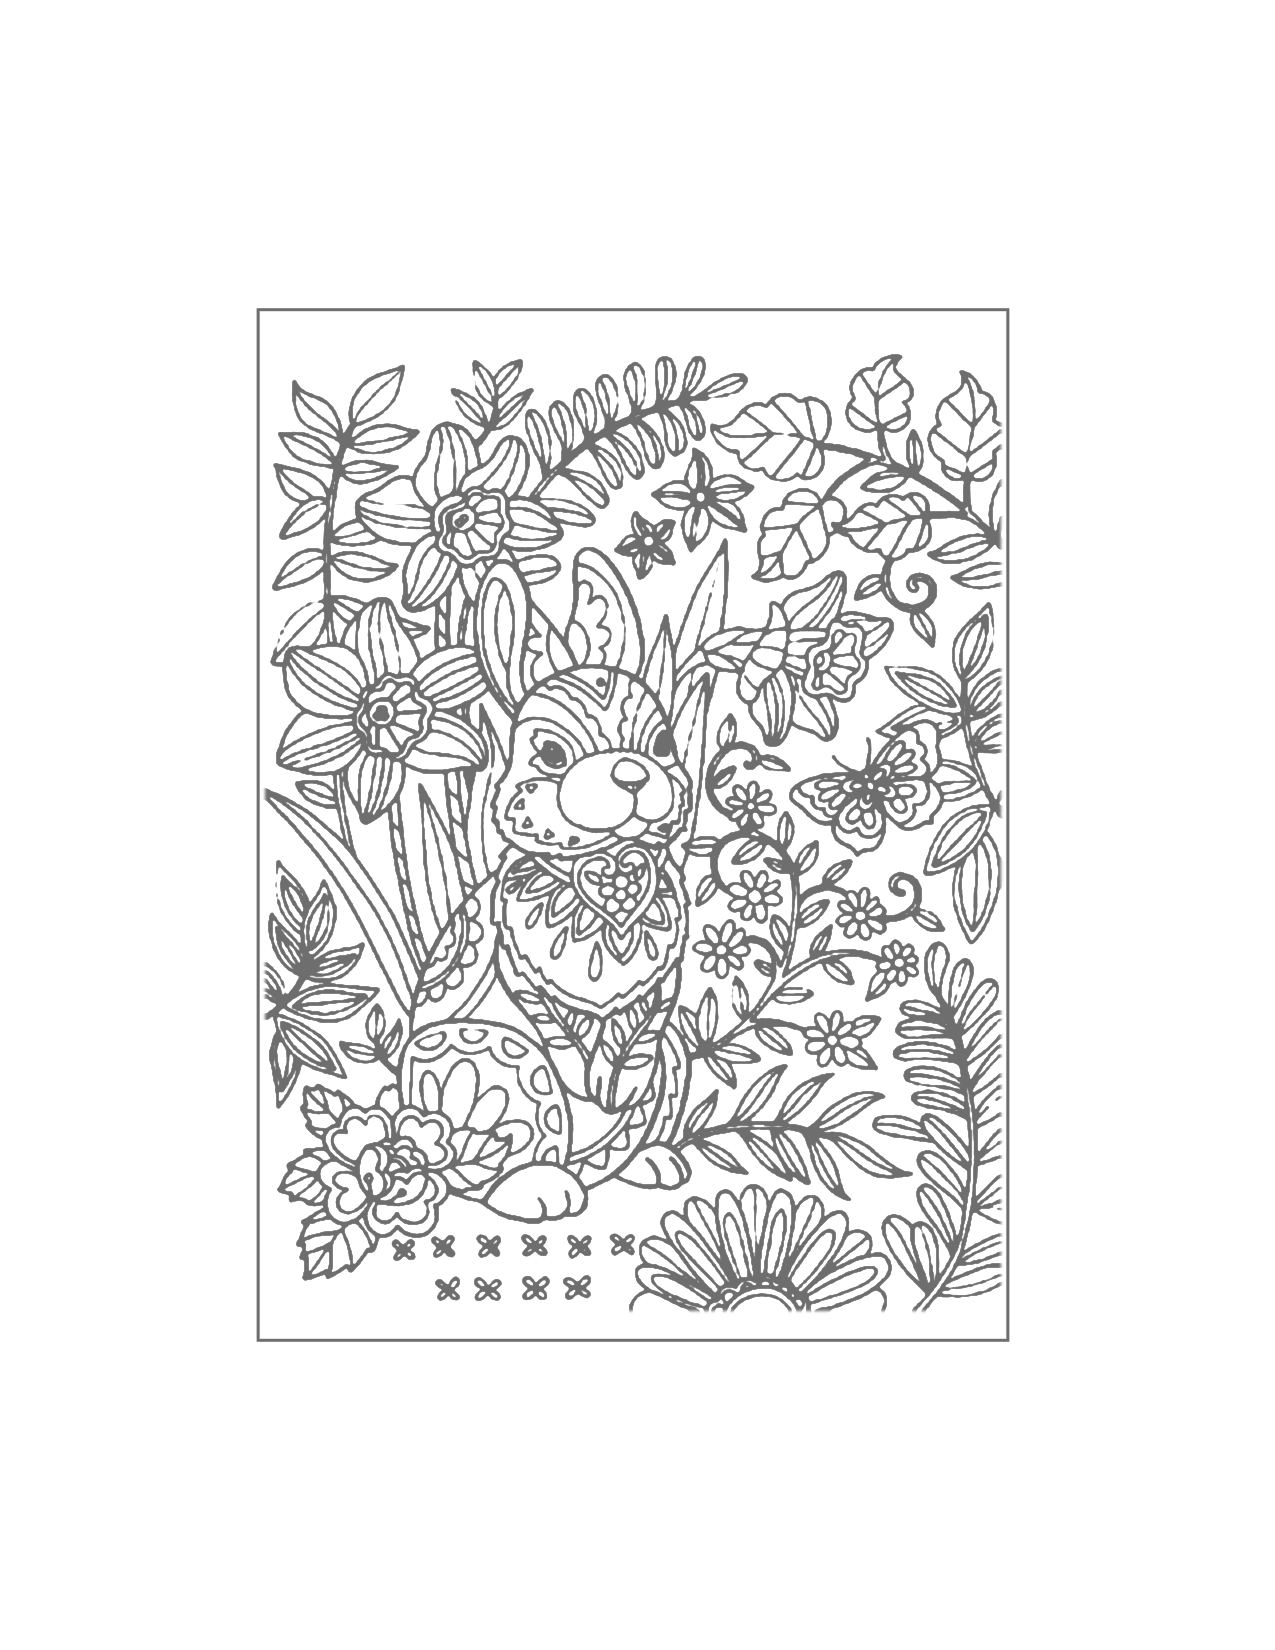 Detailed Rabbit Coloring Page